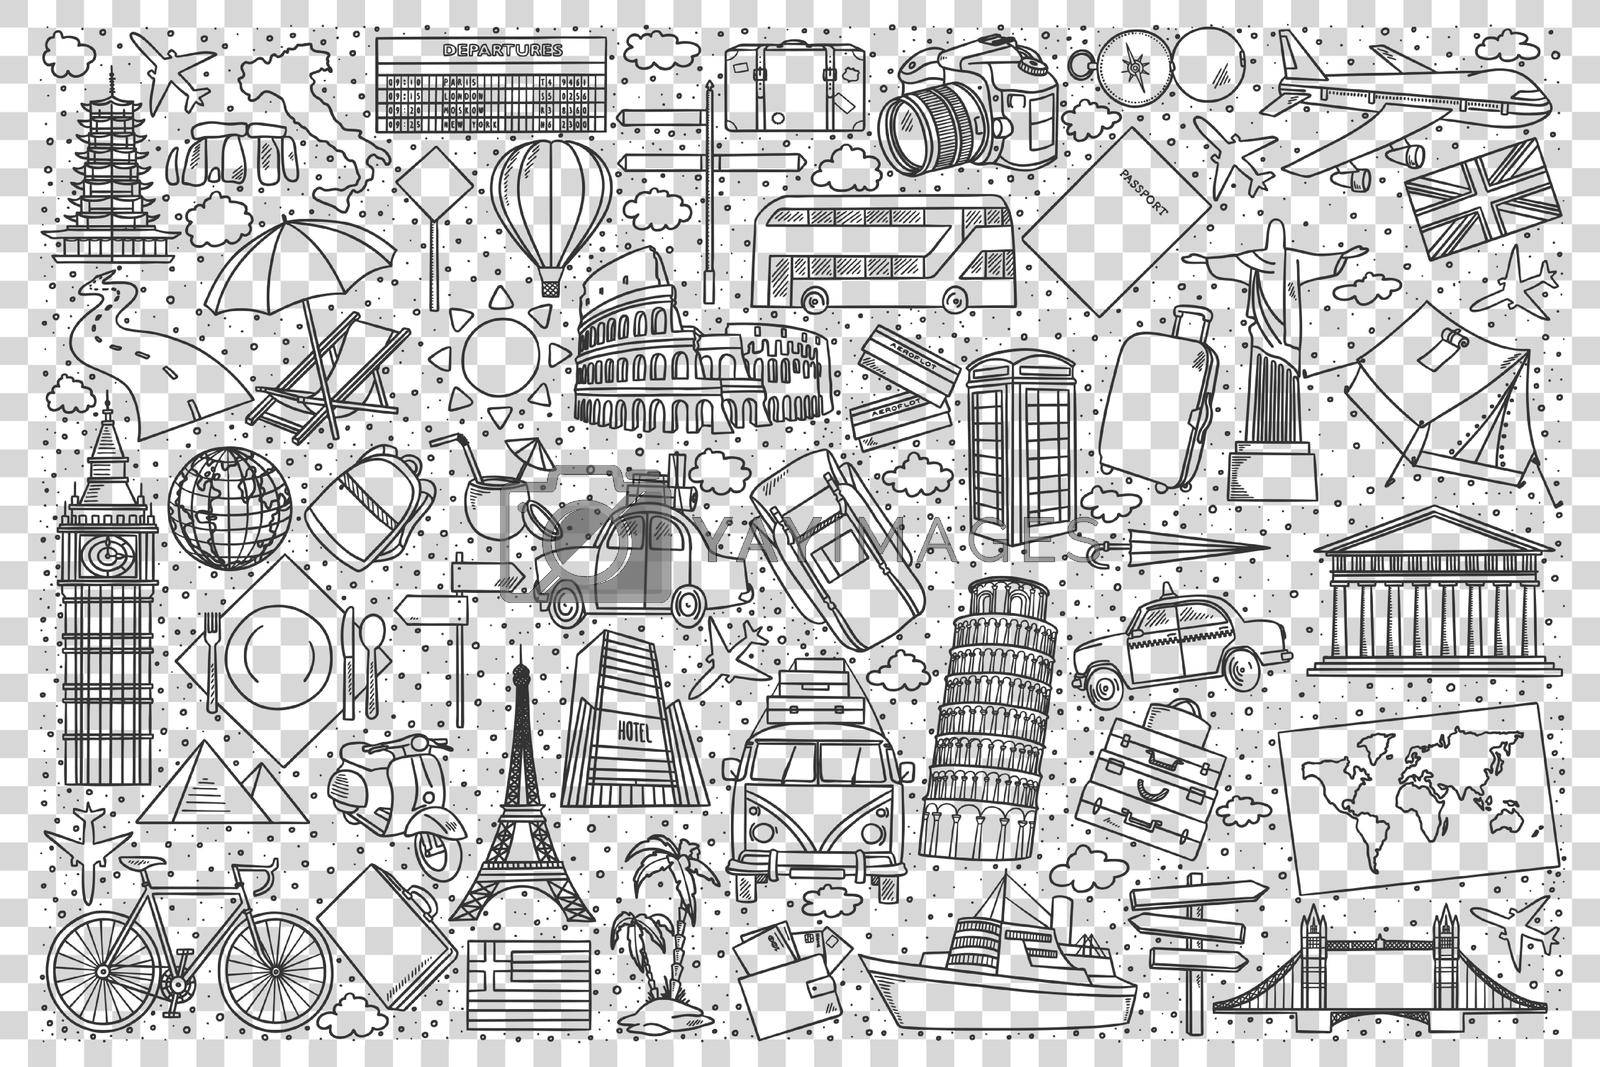 Travel doodle set. Collection of hand drawn sketches templates patterns of tourism travelling around world on holiday or vacation and countries landmarks. Active lifestyle recreation illustration.